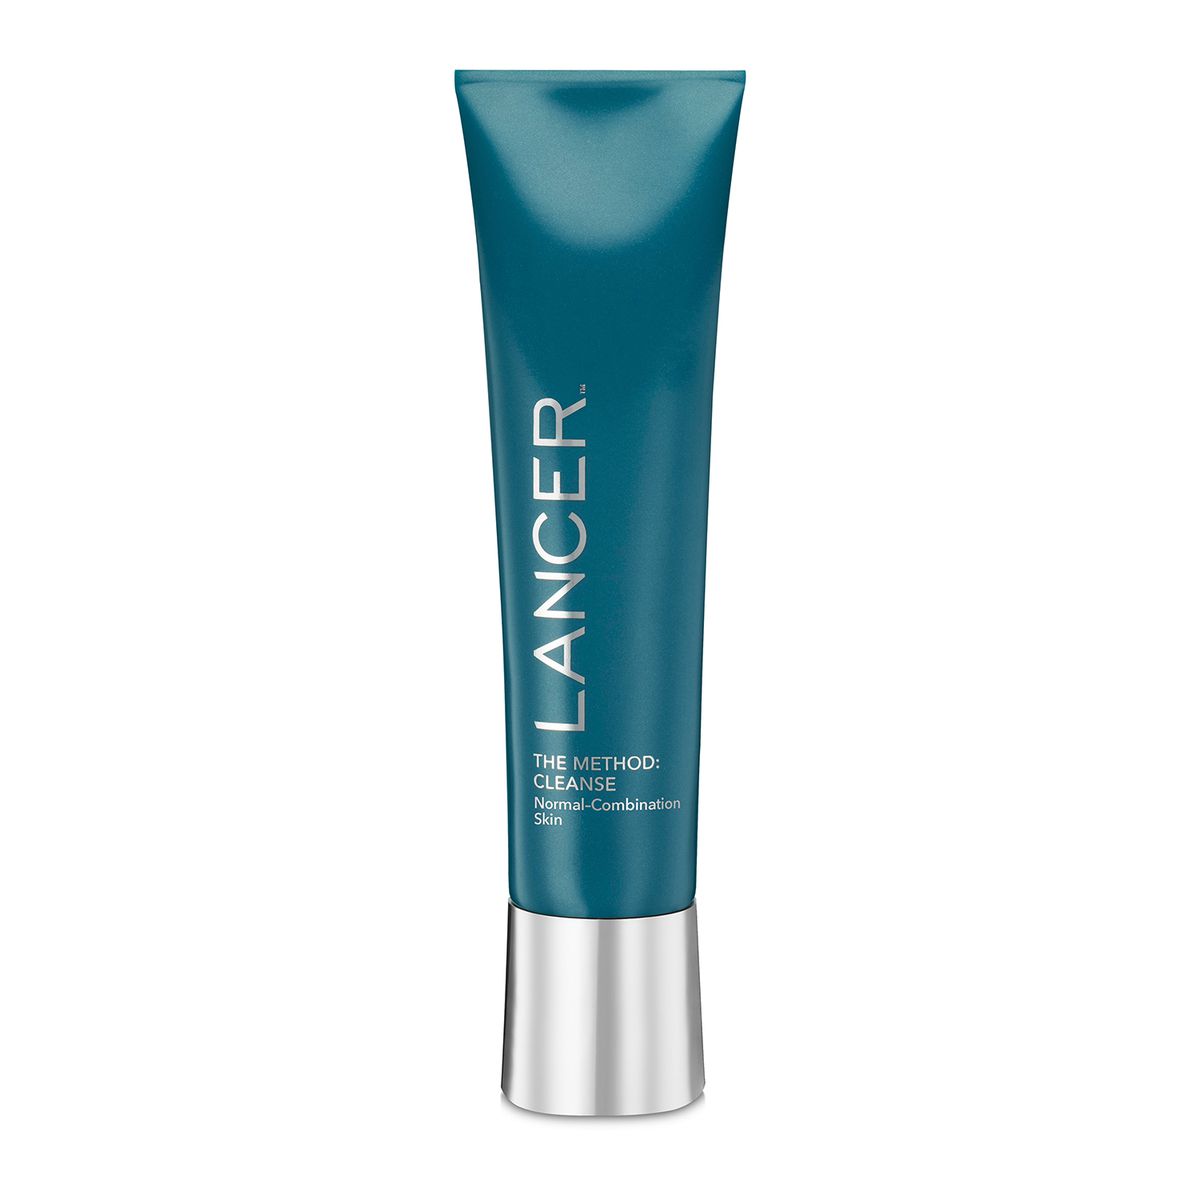 LANCER Skincare The Method Cleanse Normal-Combination Skin Cleanser